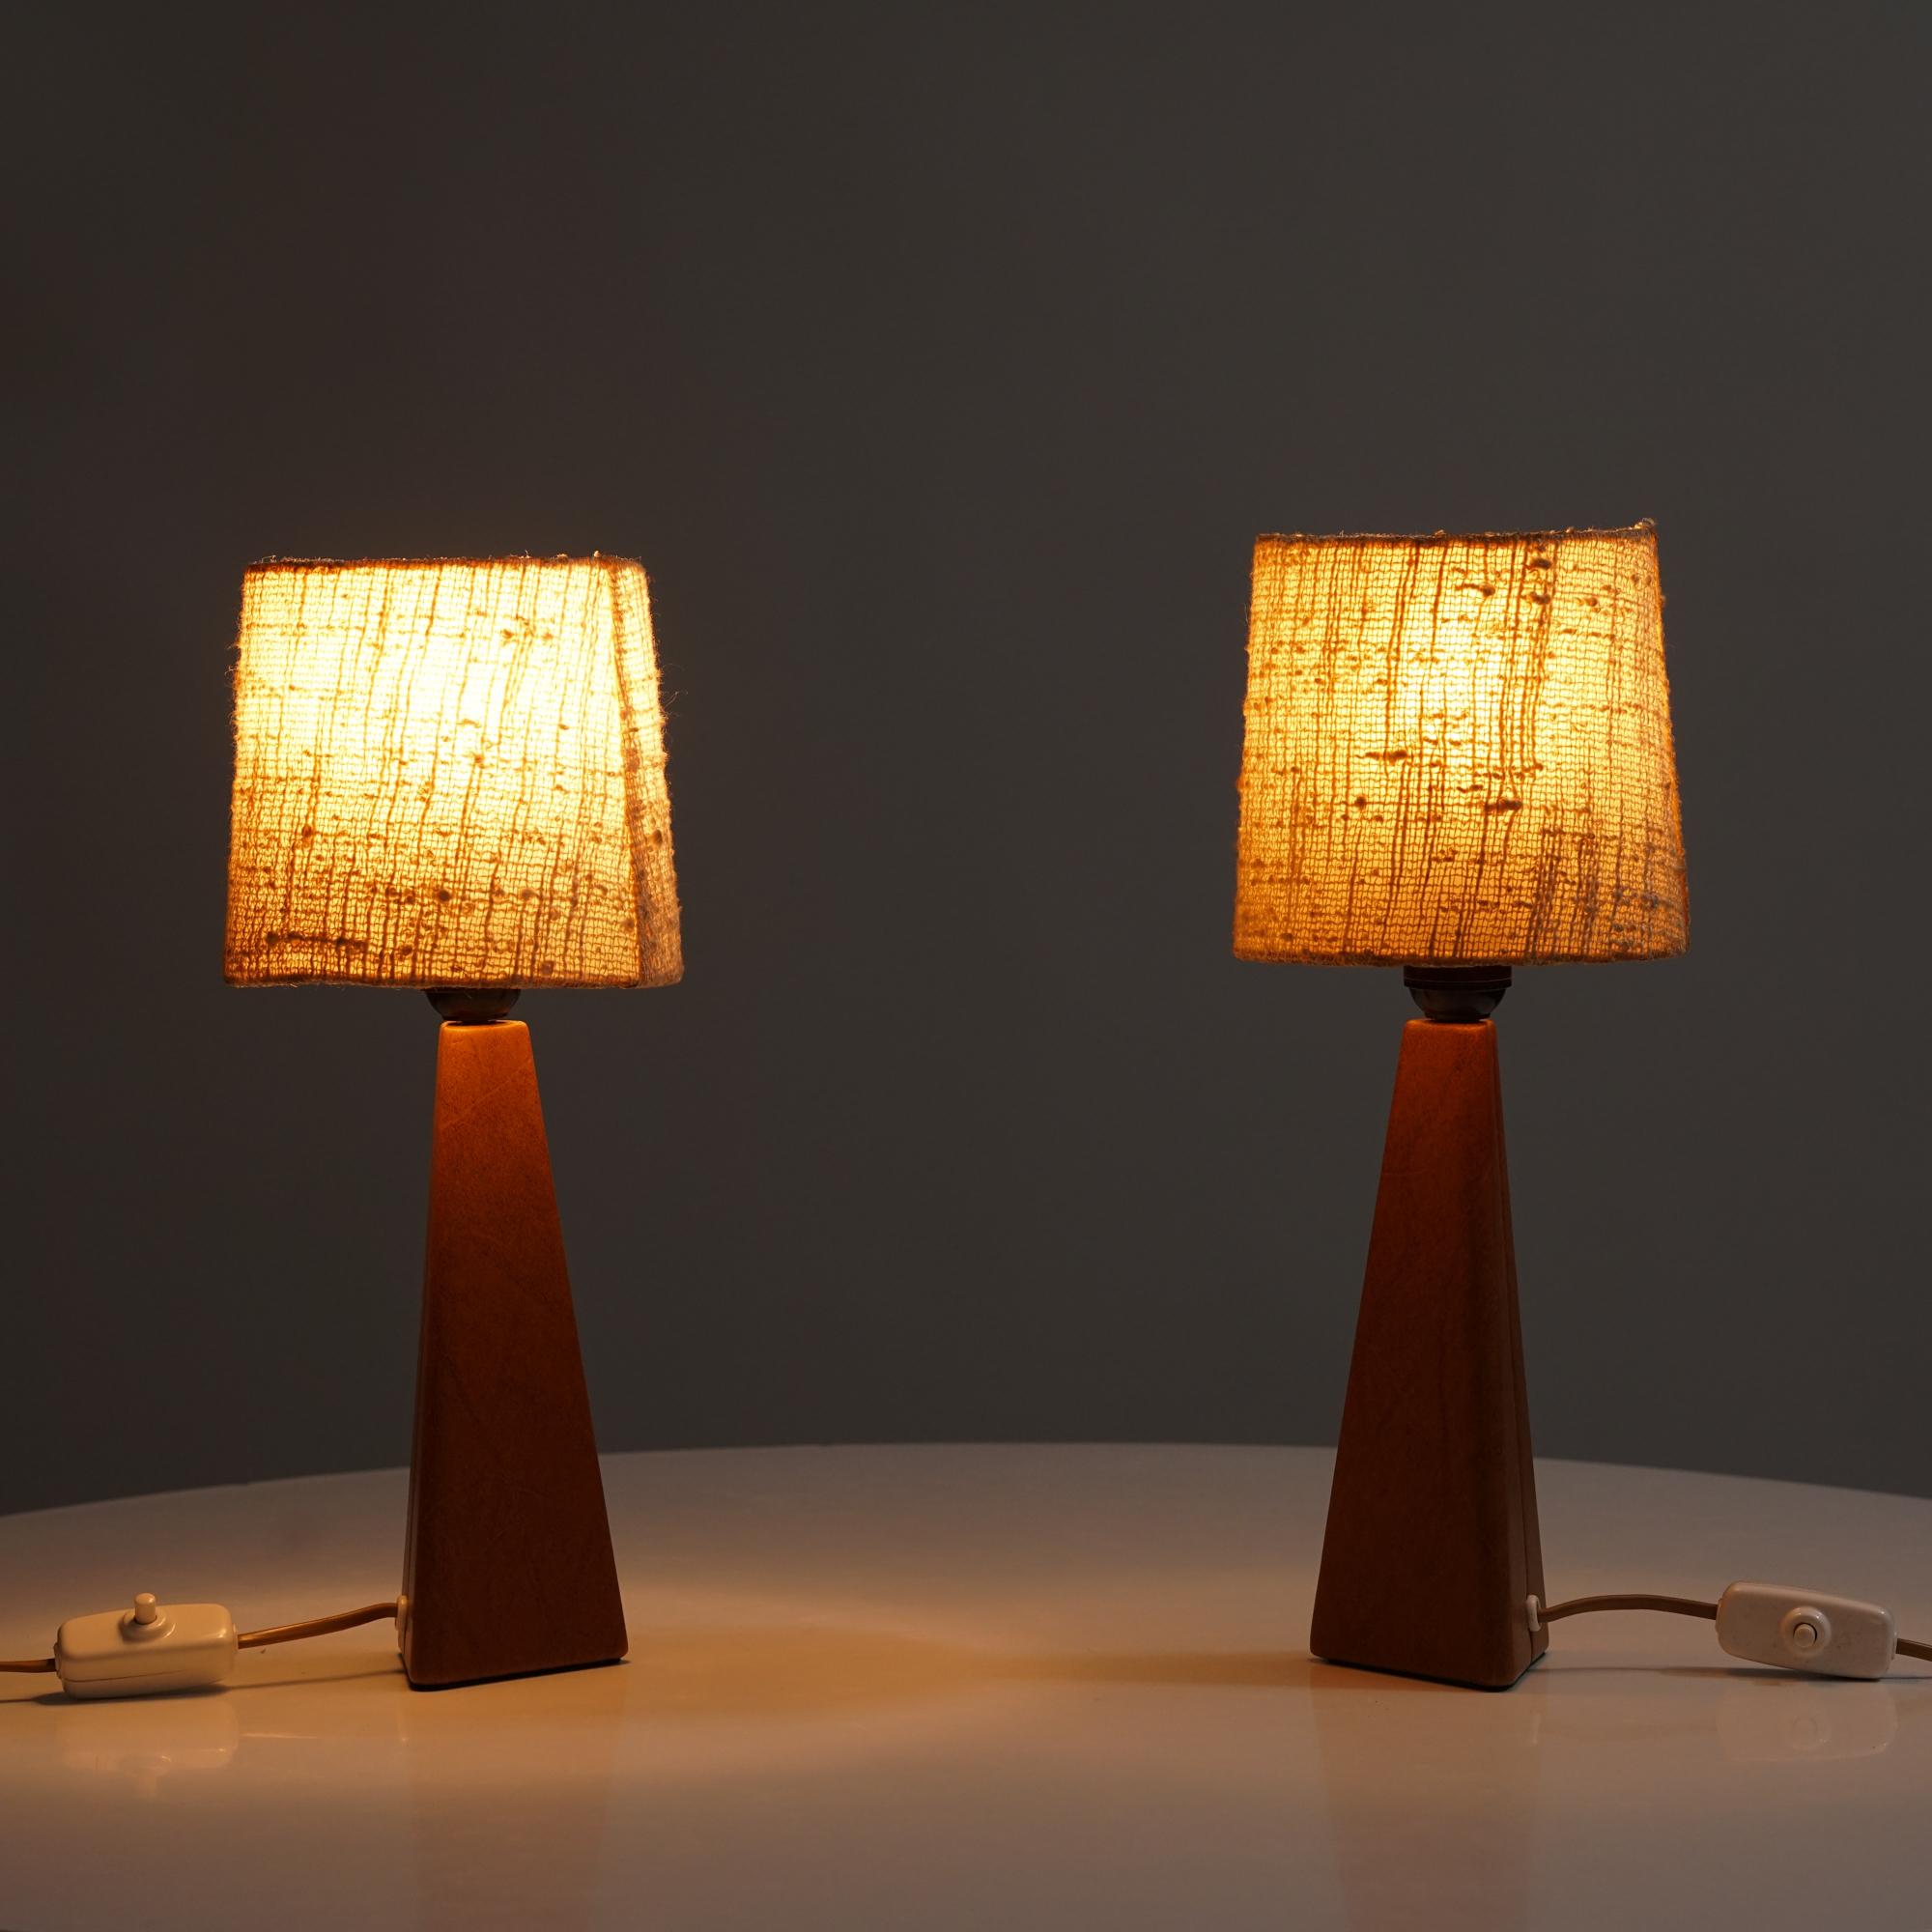 Set of two leather table lamps by Lisa Johansson-Pape for Orno, Mid-20th Century. Leather frame with fabric lampshades. The lampshades are not original. Good vintage condition, minor patina and wear consistent with age and use. The table lamps are